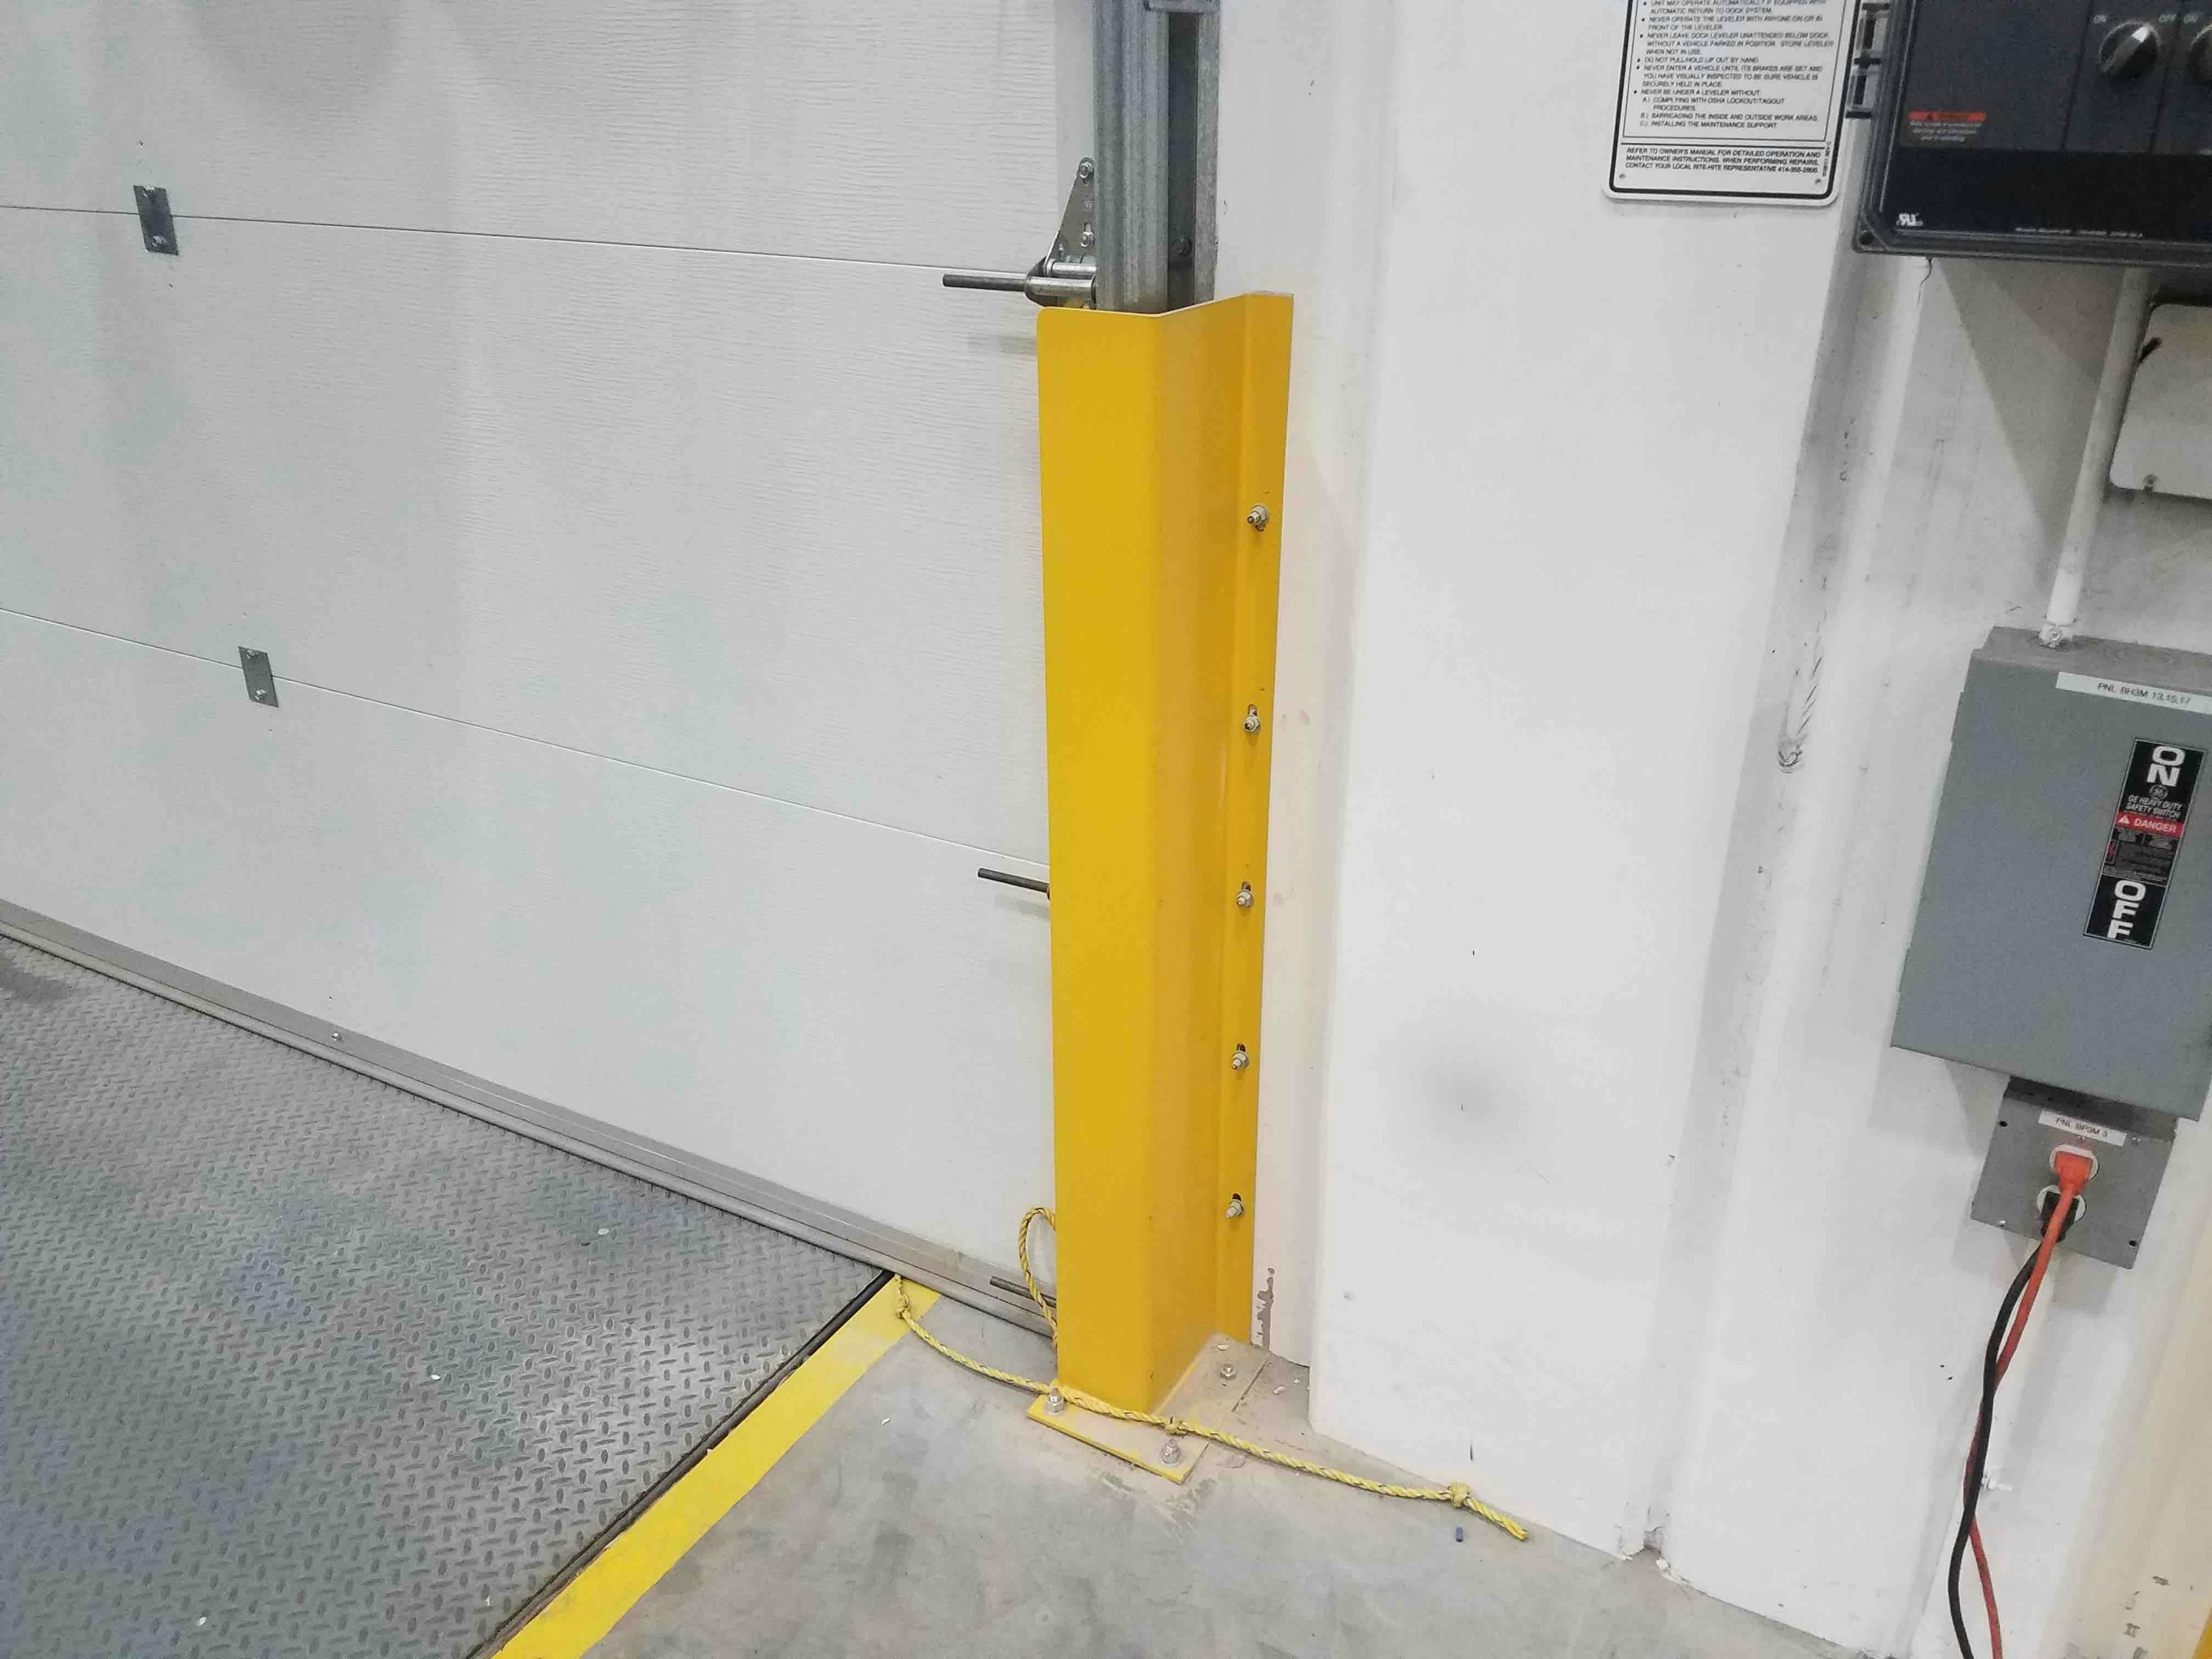 OSHA yellow Track Armor protecting vertical door rails in manufacturing warehouse